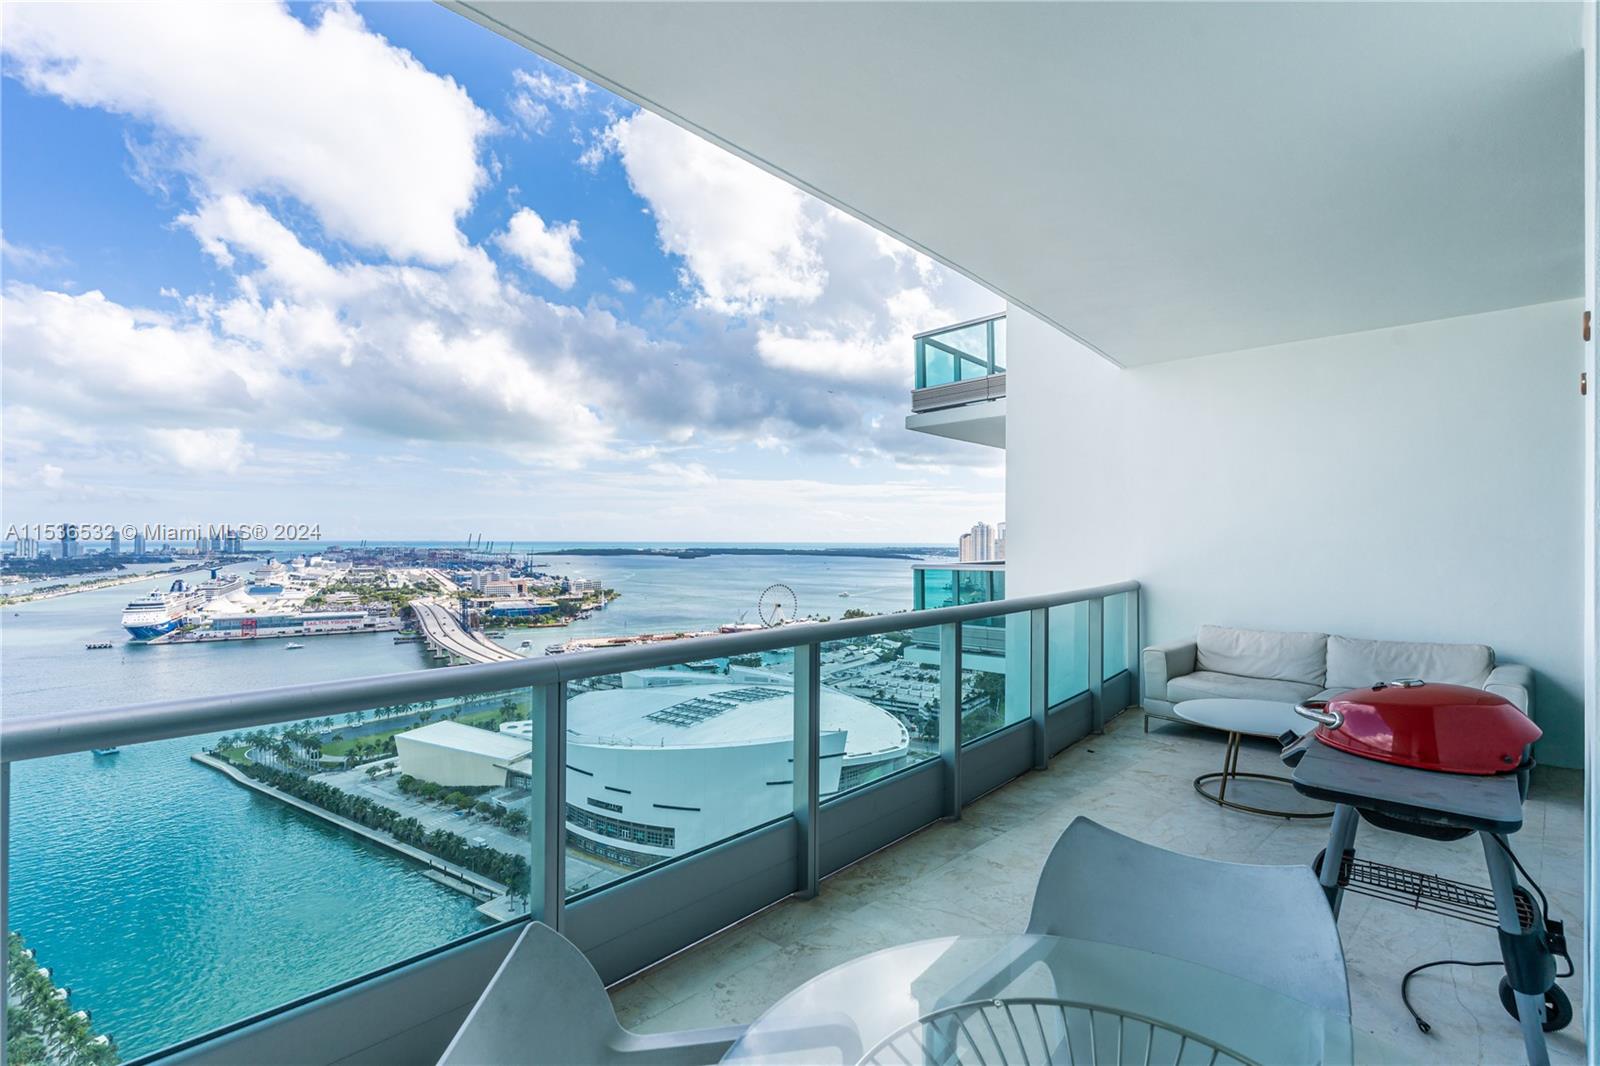 Stunning 3 bedrooms/ 3 bathrooms apartment with panoramic views of the Port of Miami, downtown, and Miami Beach. Enjoy the luxury living at 900 Biscayne. Apartment with high end finishes, private elevator entrance, high ceilings and marble floors throughout. The European kitchen boasts top-of-the-line Sub-Zero and Miele appliances. Ample storage with large closets, plus a convenient laundry room. Indulge in the building's amenities, including a well-equipped gym and spa, pool kids' room, and elegant lounges. Live in style with this spacious and sophisticated residence. Building requires one month security deposit. Easy to show.